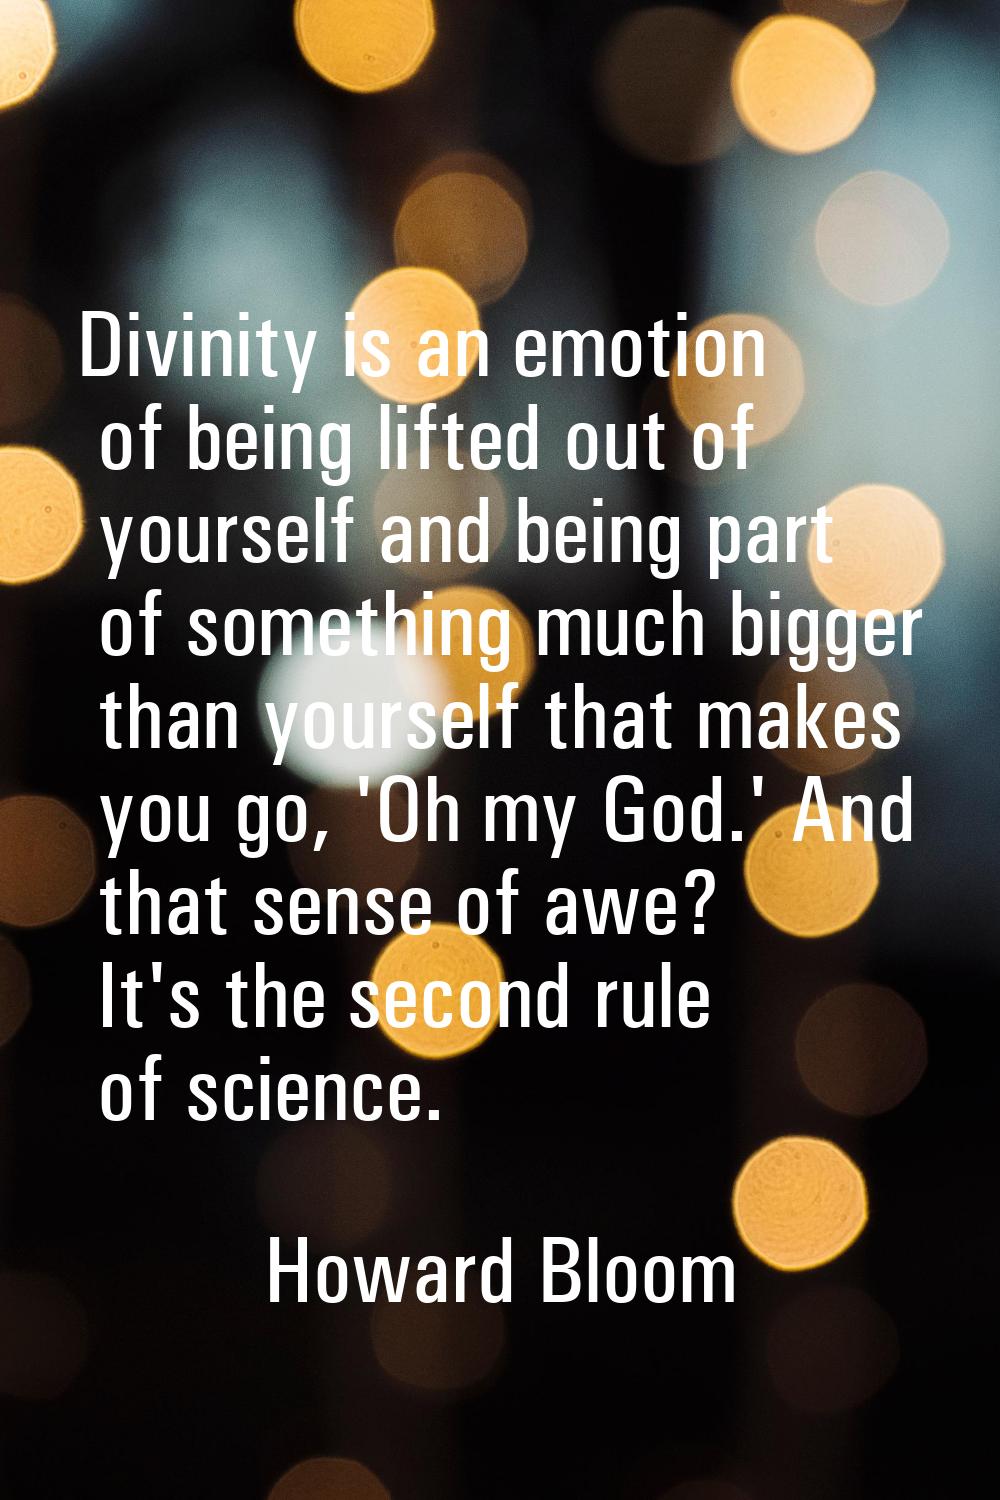 Divinity is an emotion of being lifted out of yourself and being part of something much bigger than